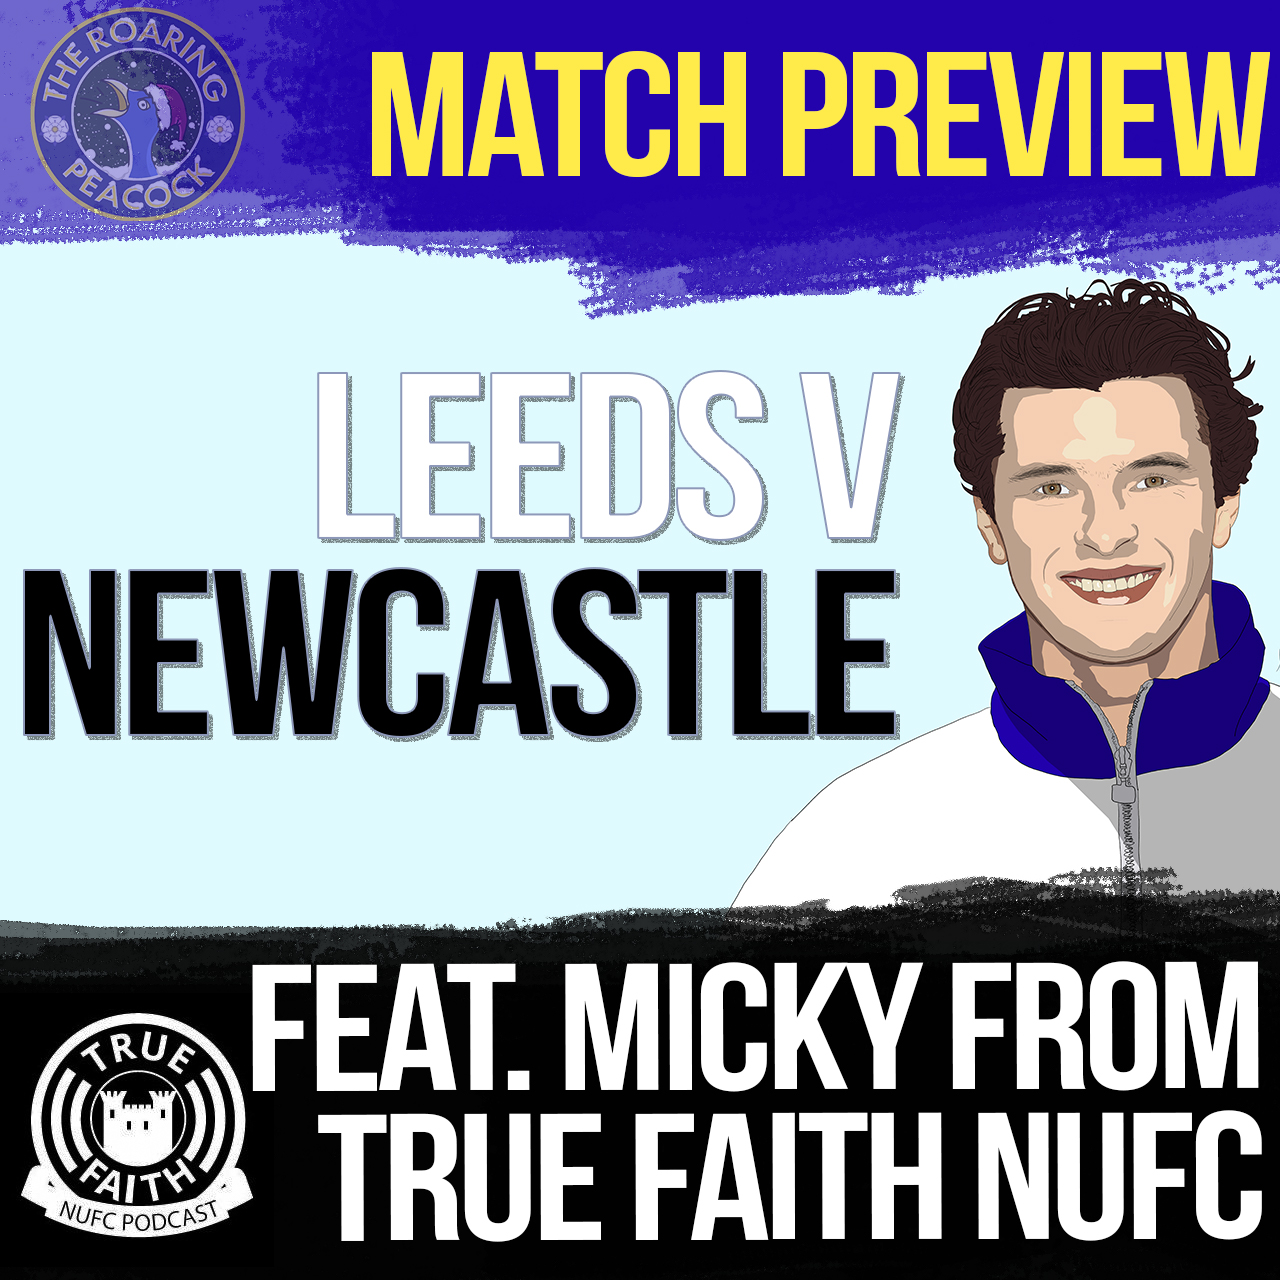 Leeds v Newcastle | Match Preview feat. Micky from True Faith NUFC podcast